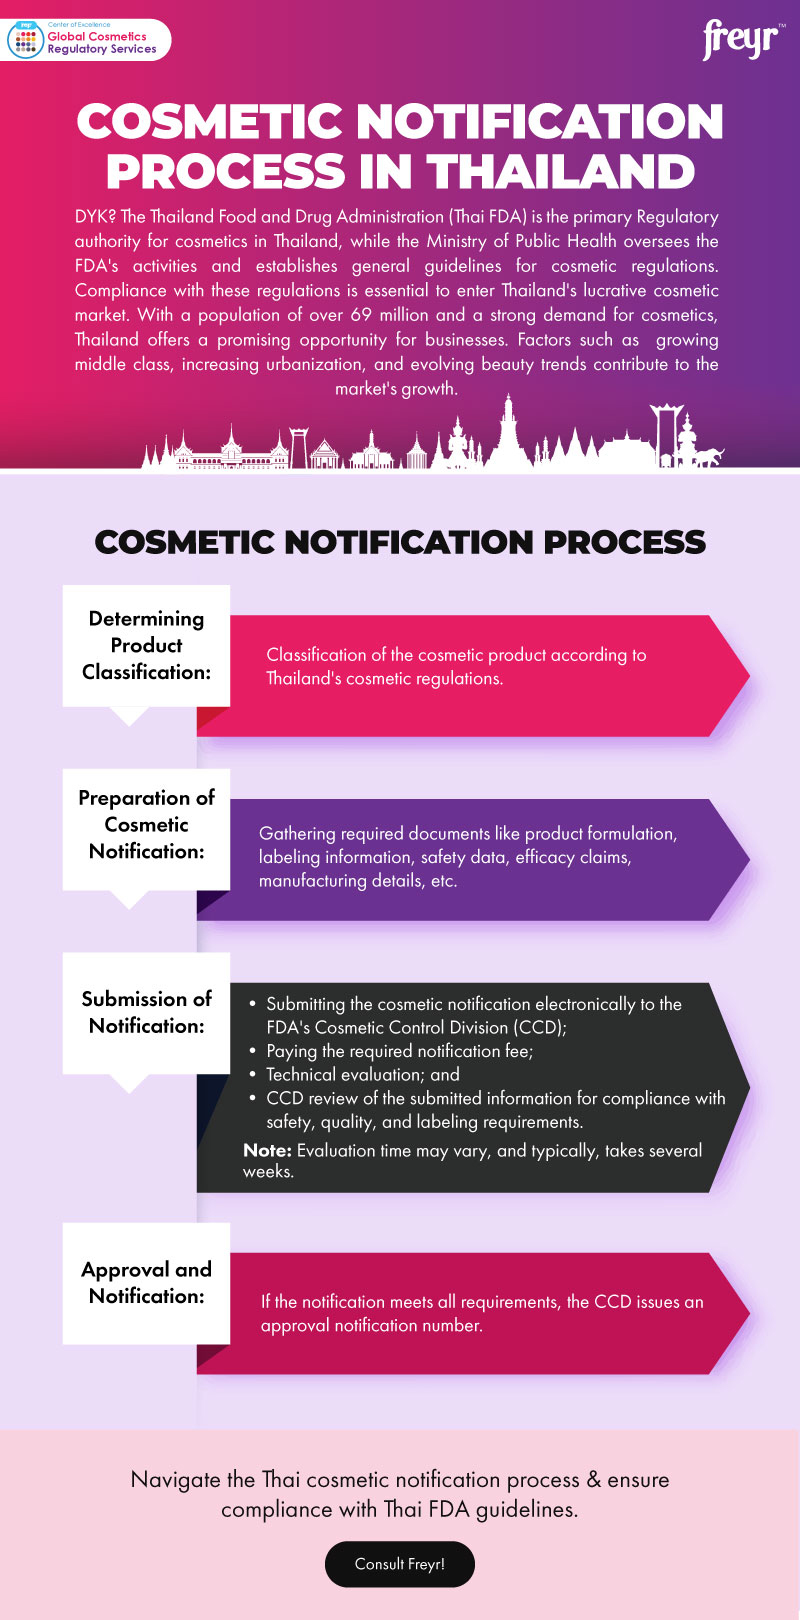 Cosmetic Notification Process in Thailand